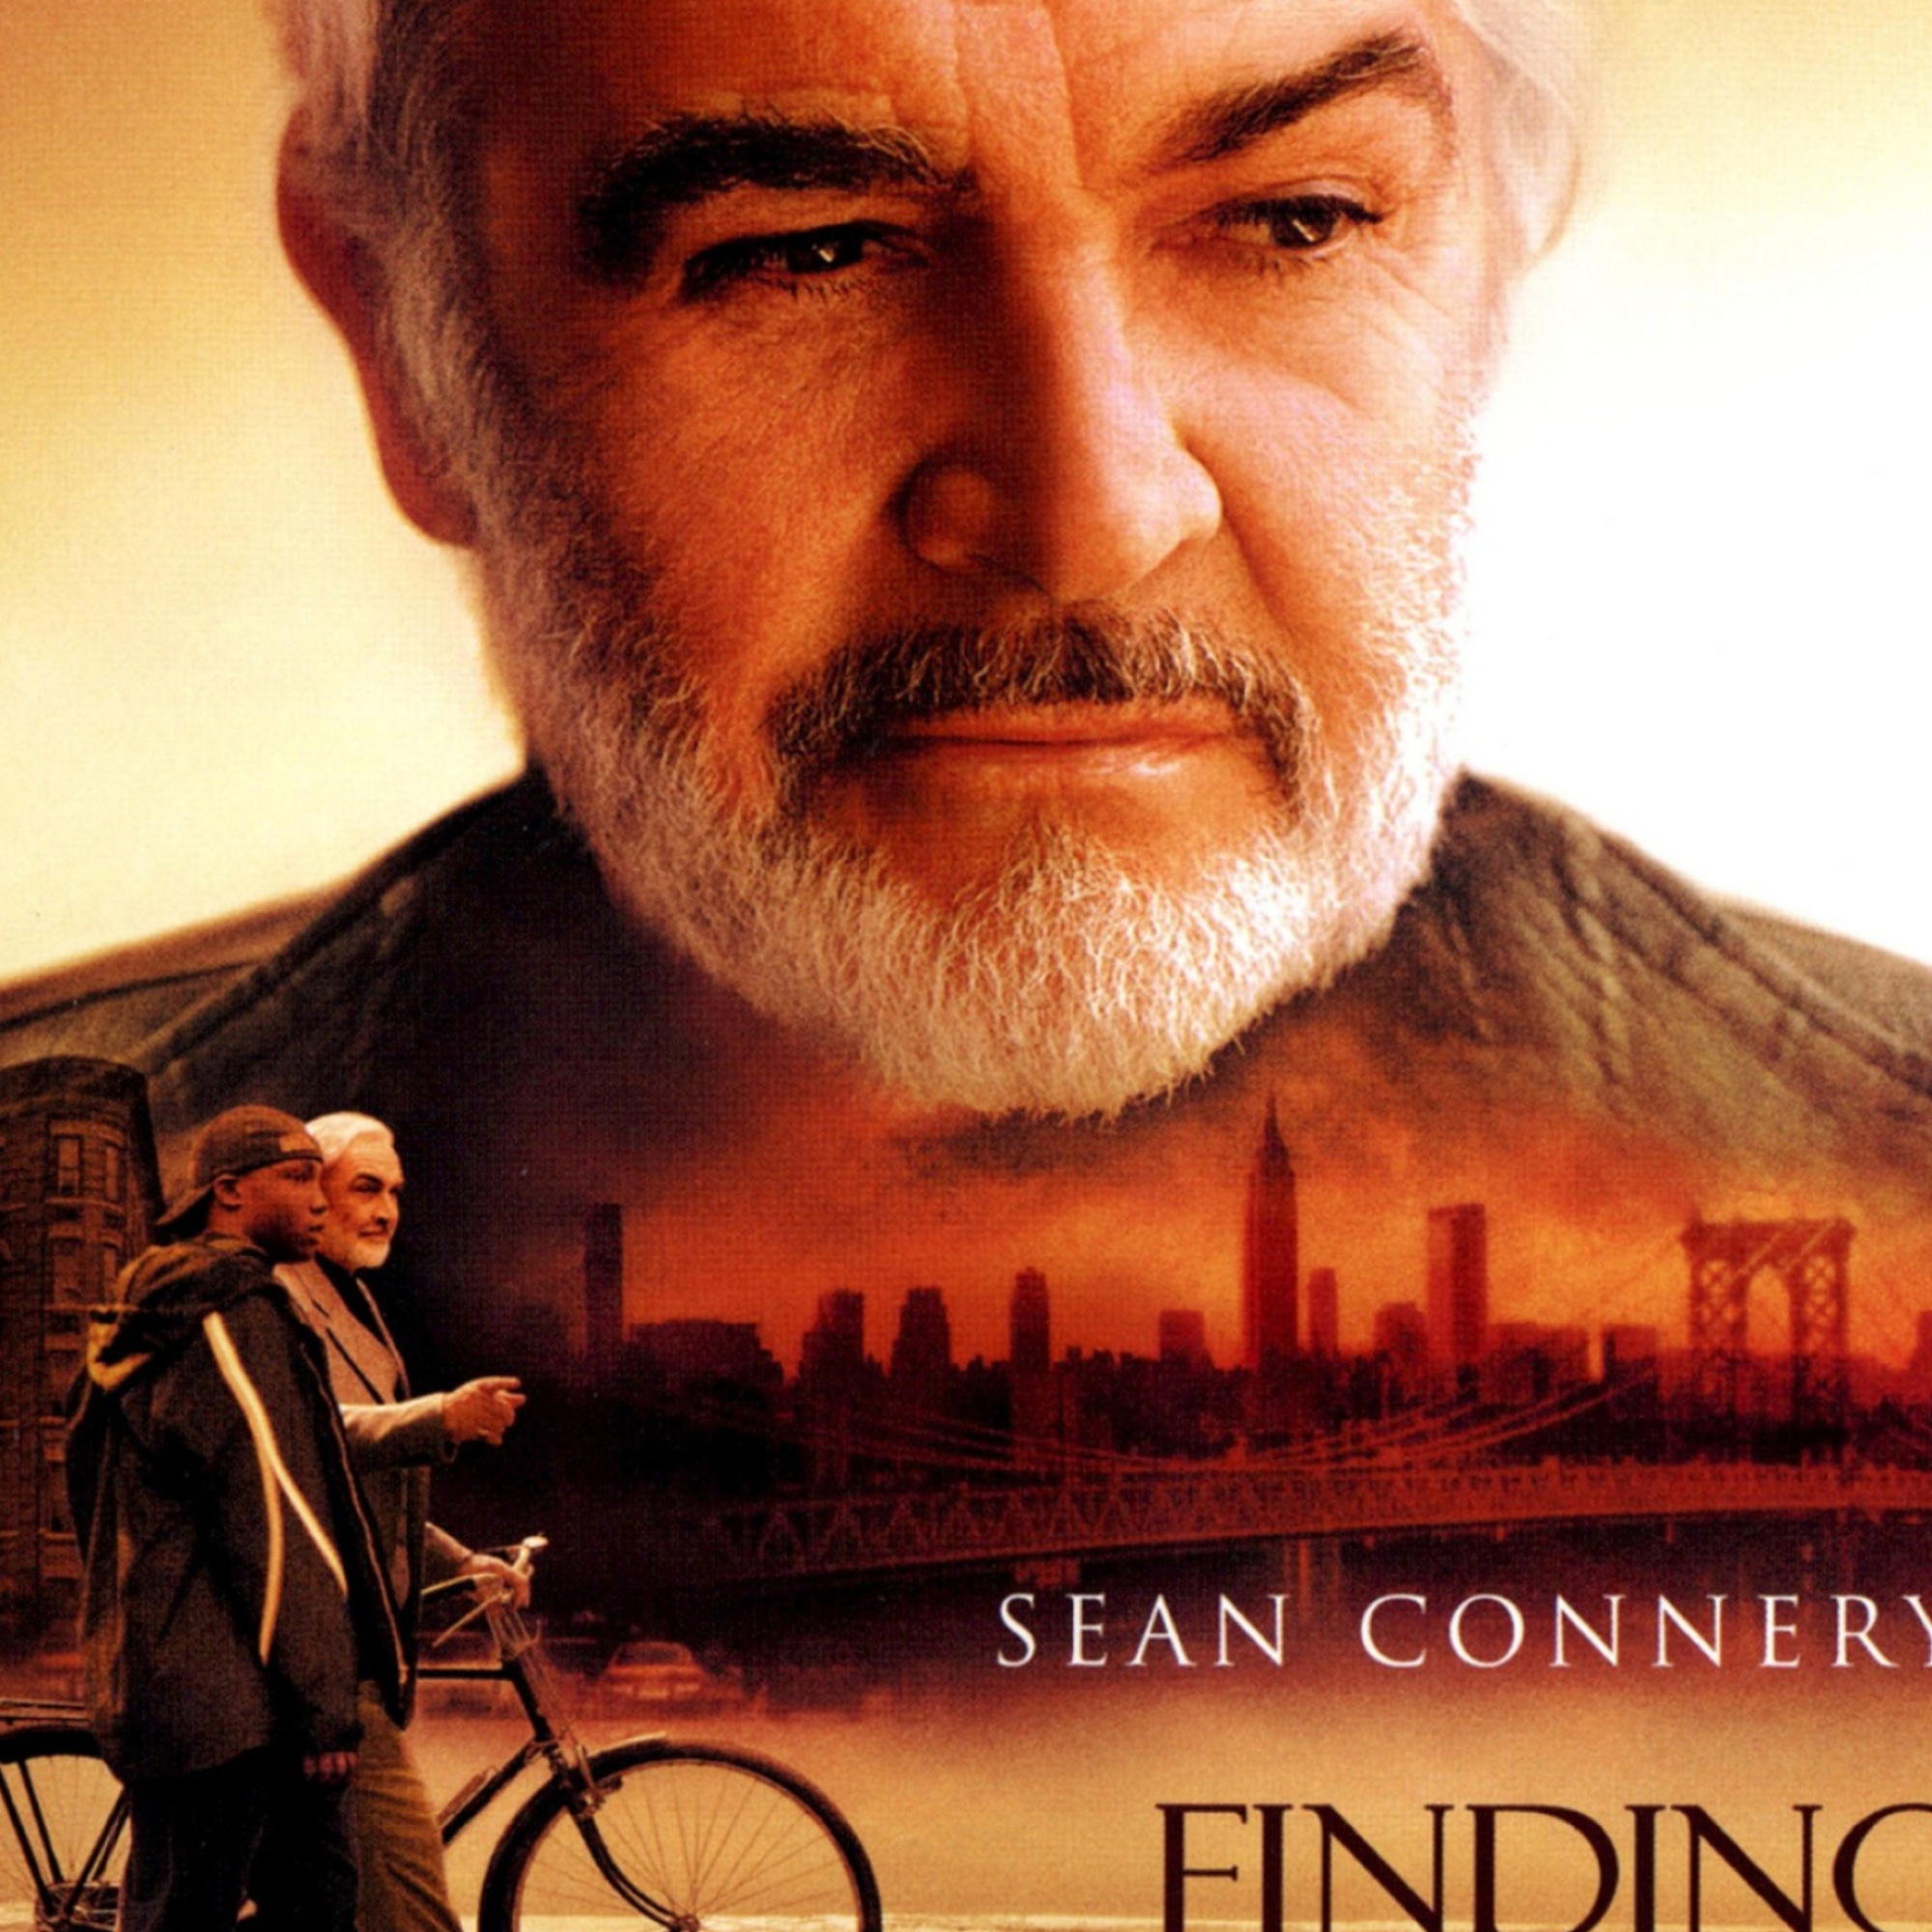 Finding Forrester: The story of a friendship between a reclusive author and an academically gifted African American teenager. 2000x2000 HD Background.